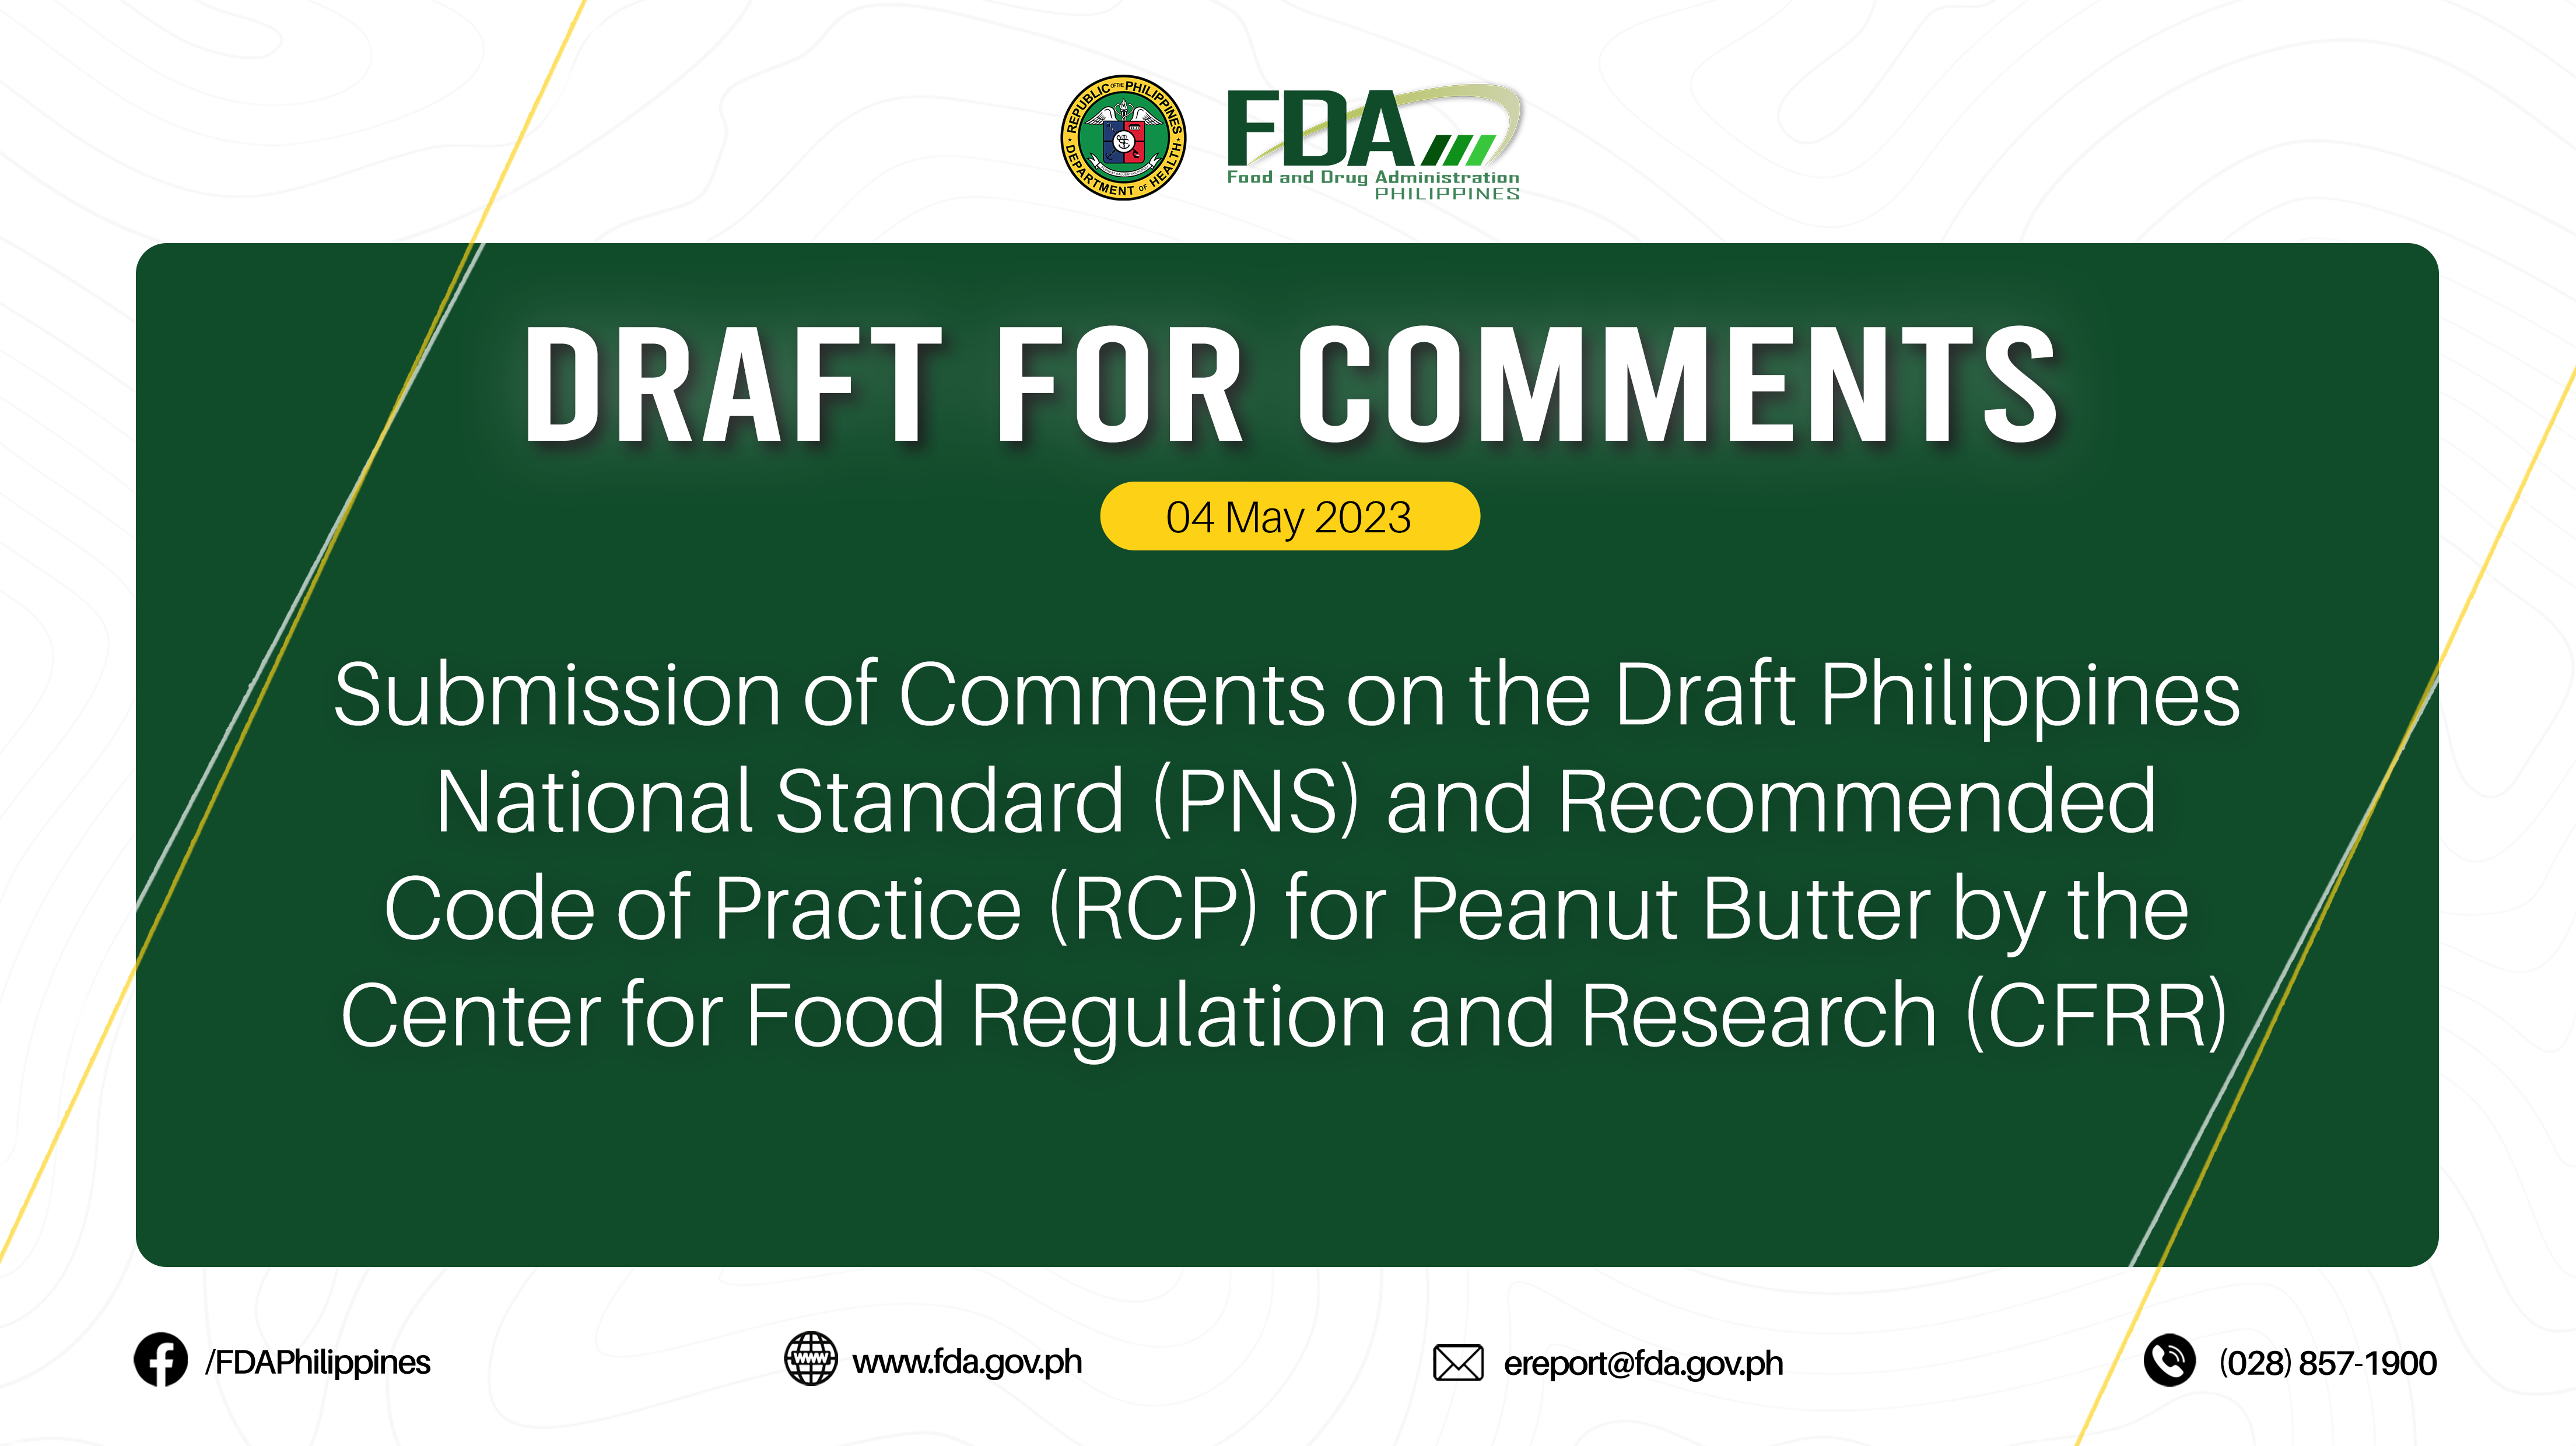 Draft for Comments || Submission of Comments on the Draft Philippines National Standard (PNS) and Recommended Code of Practice (RCP) for Peanut Butter by the Center for Food Regulation and Research (CFRR)